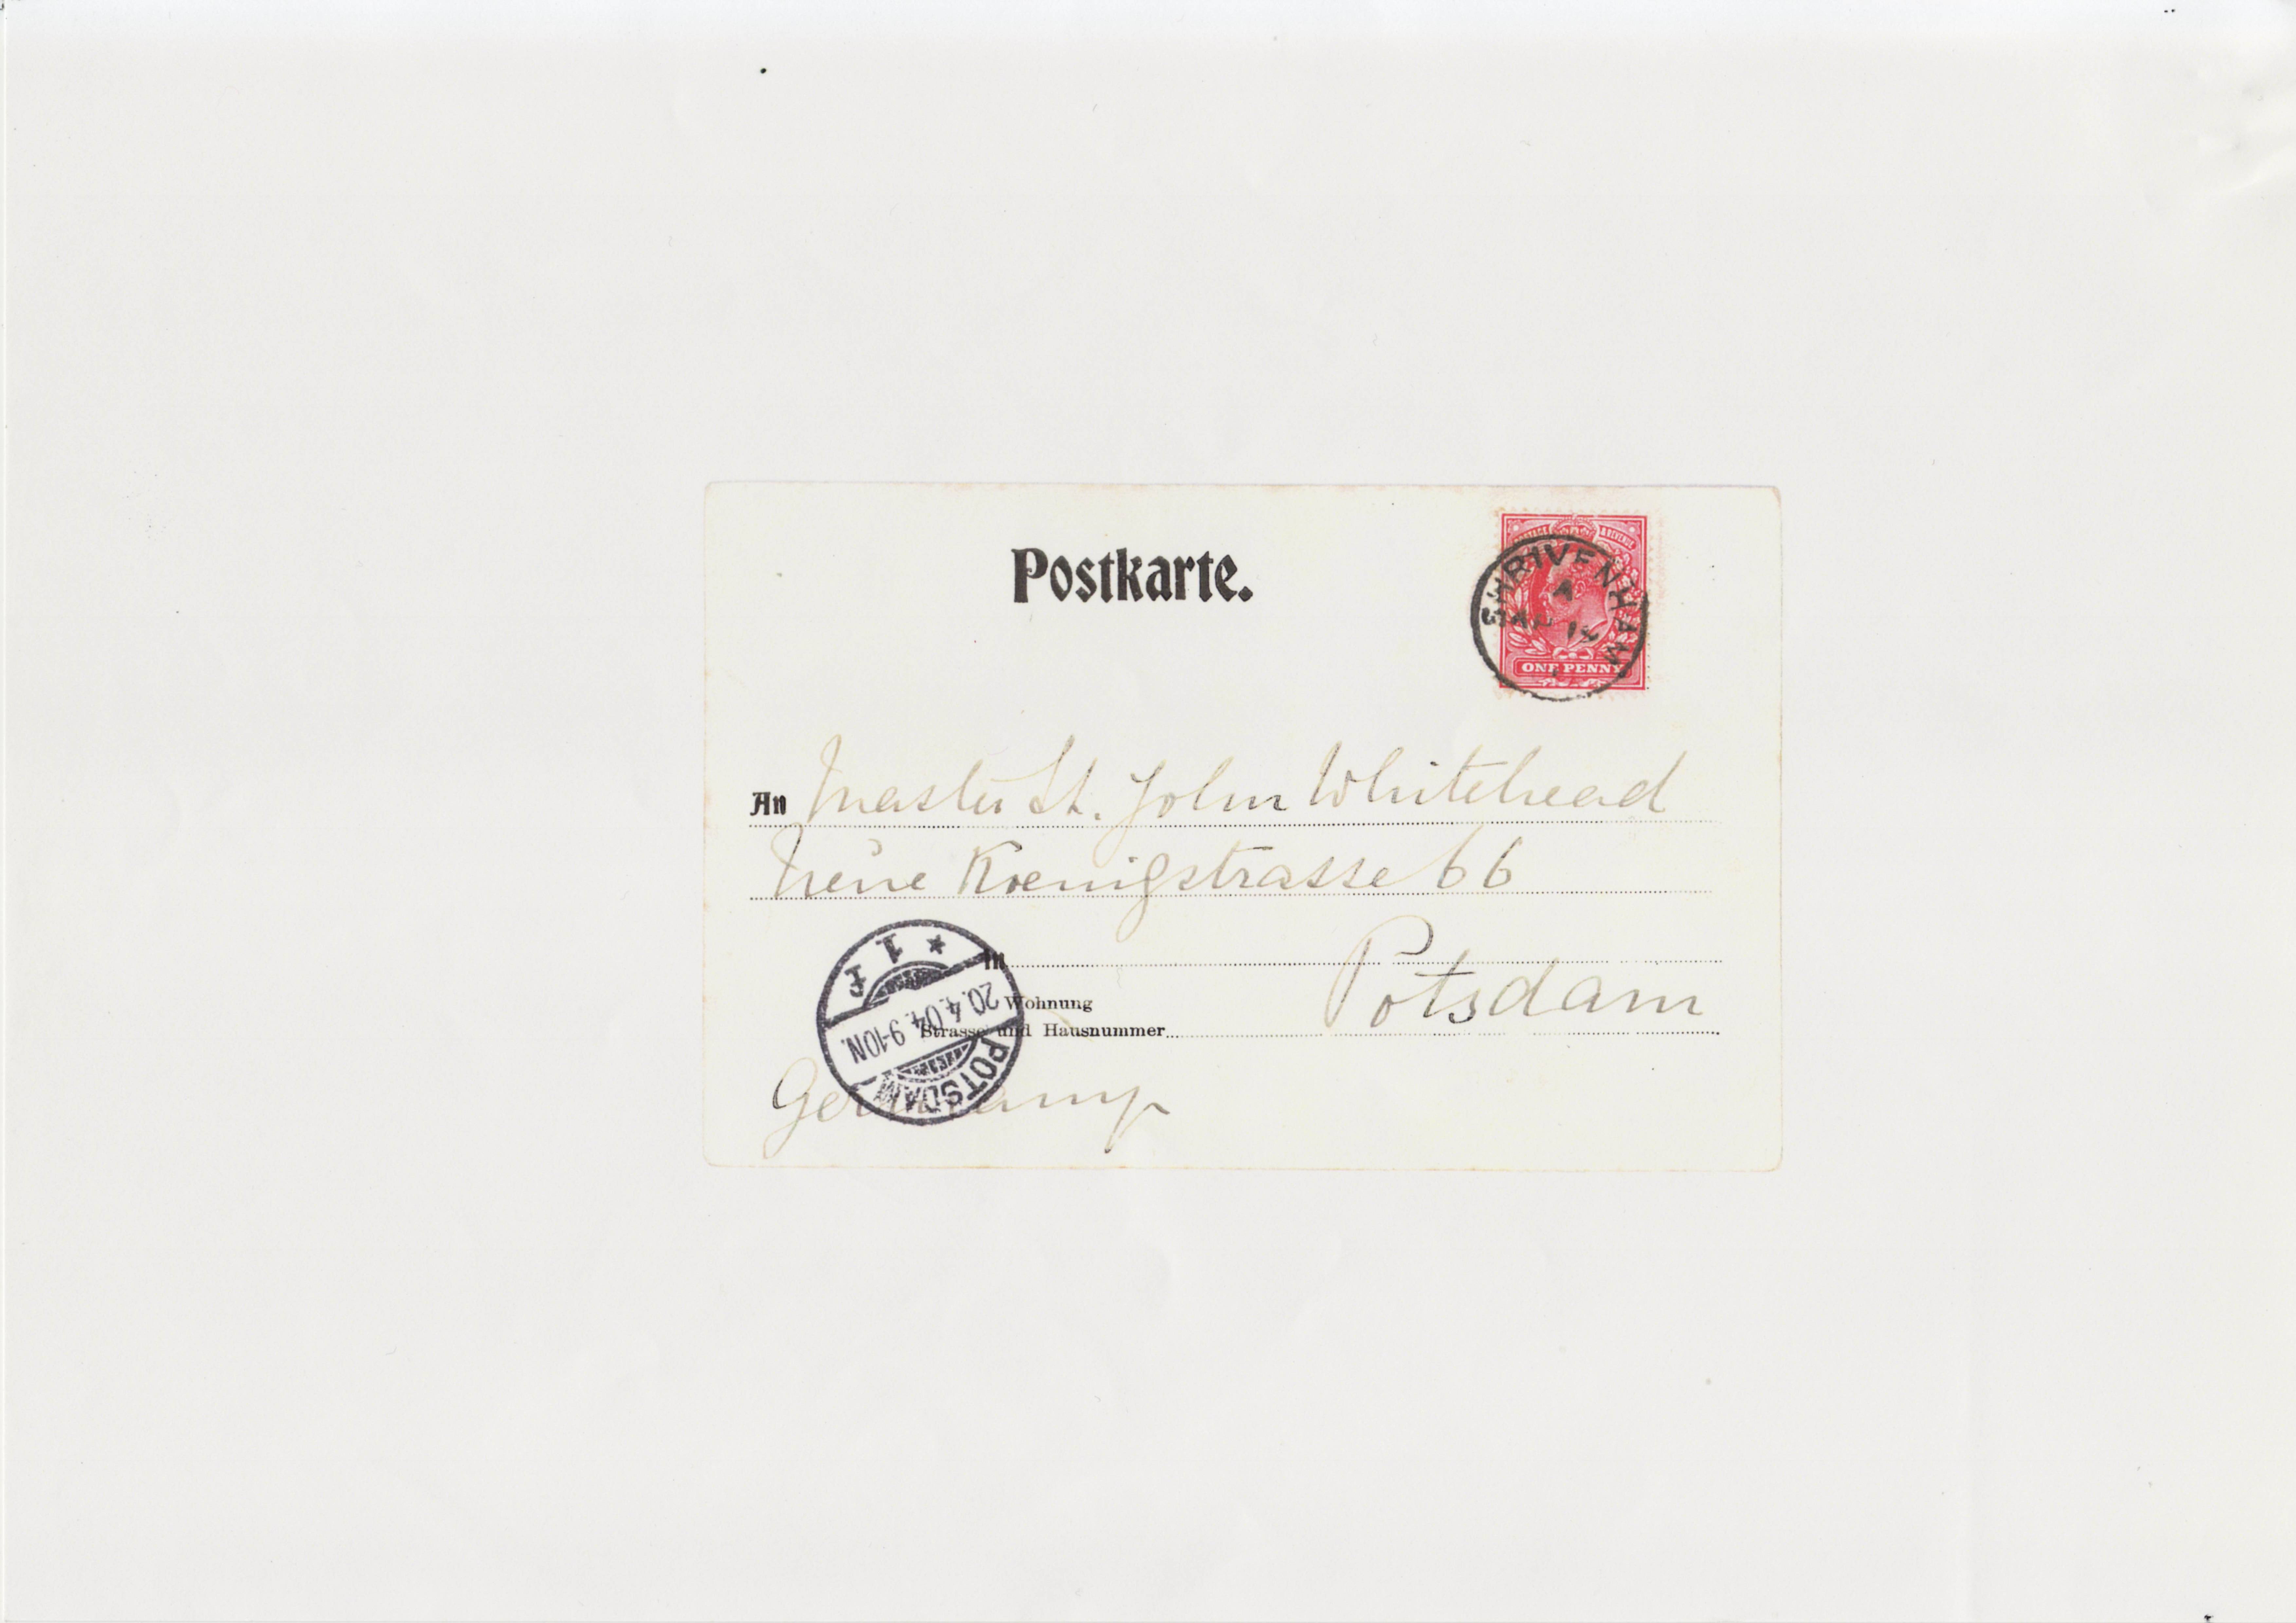 One side of a Postcard addressed to John Whitehead